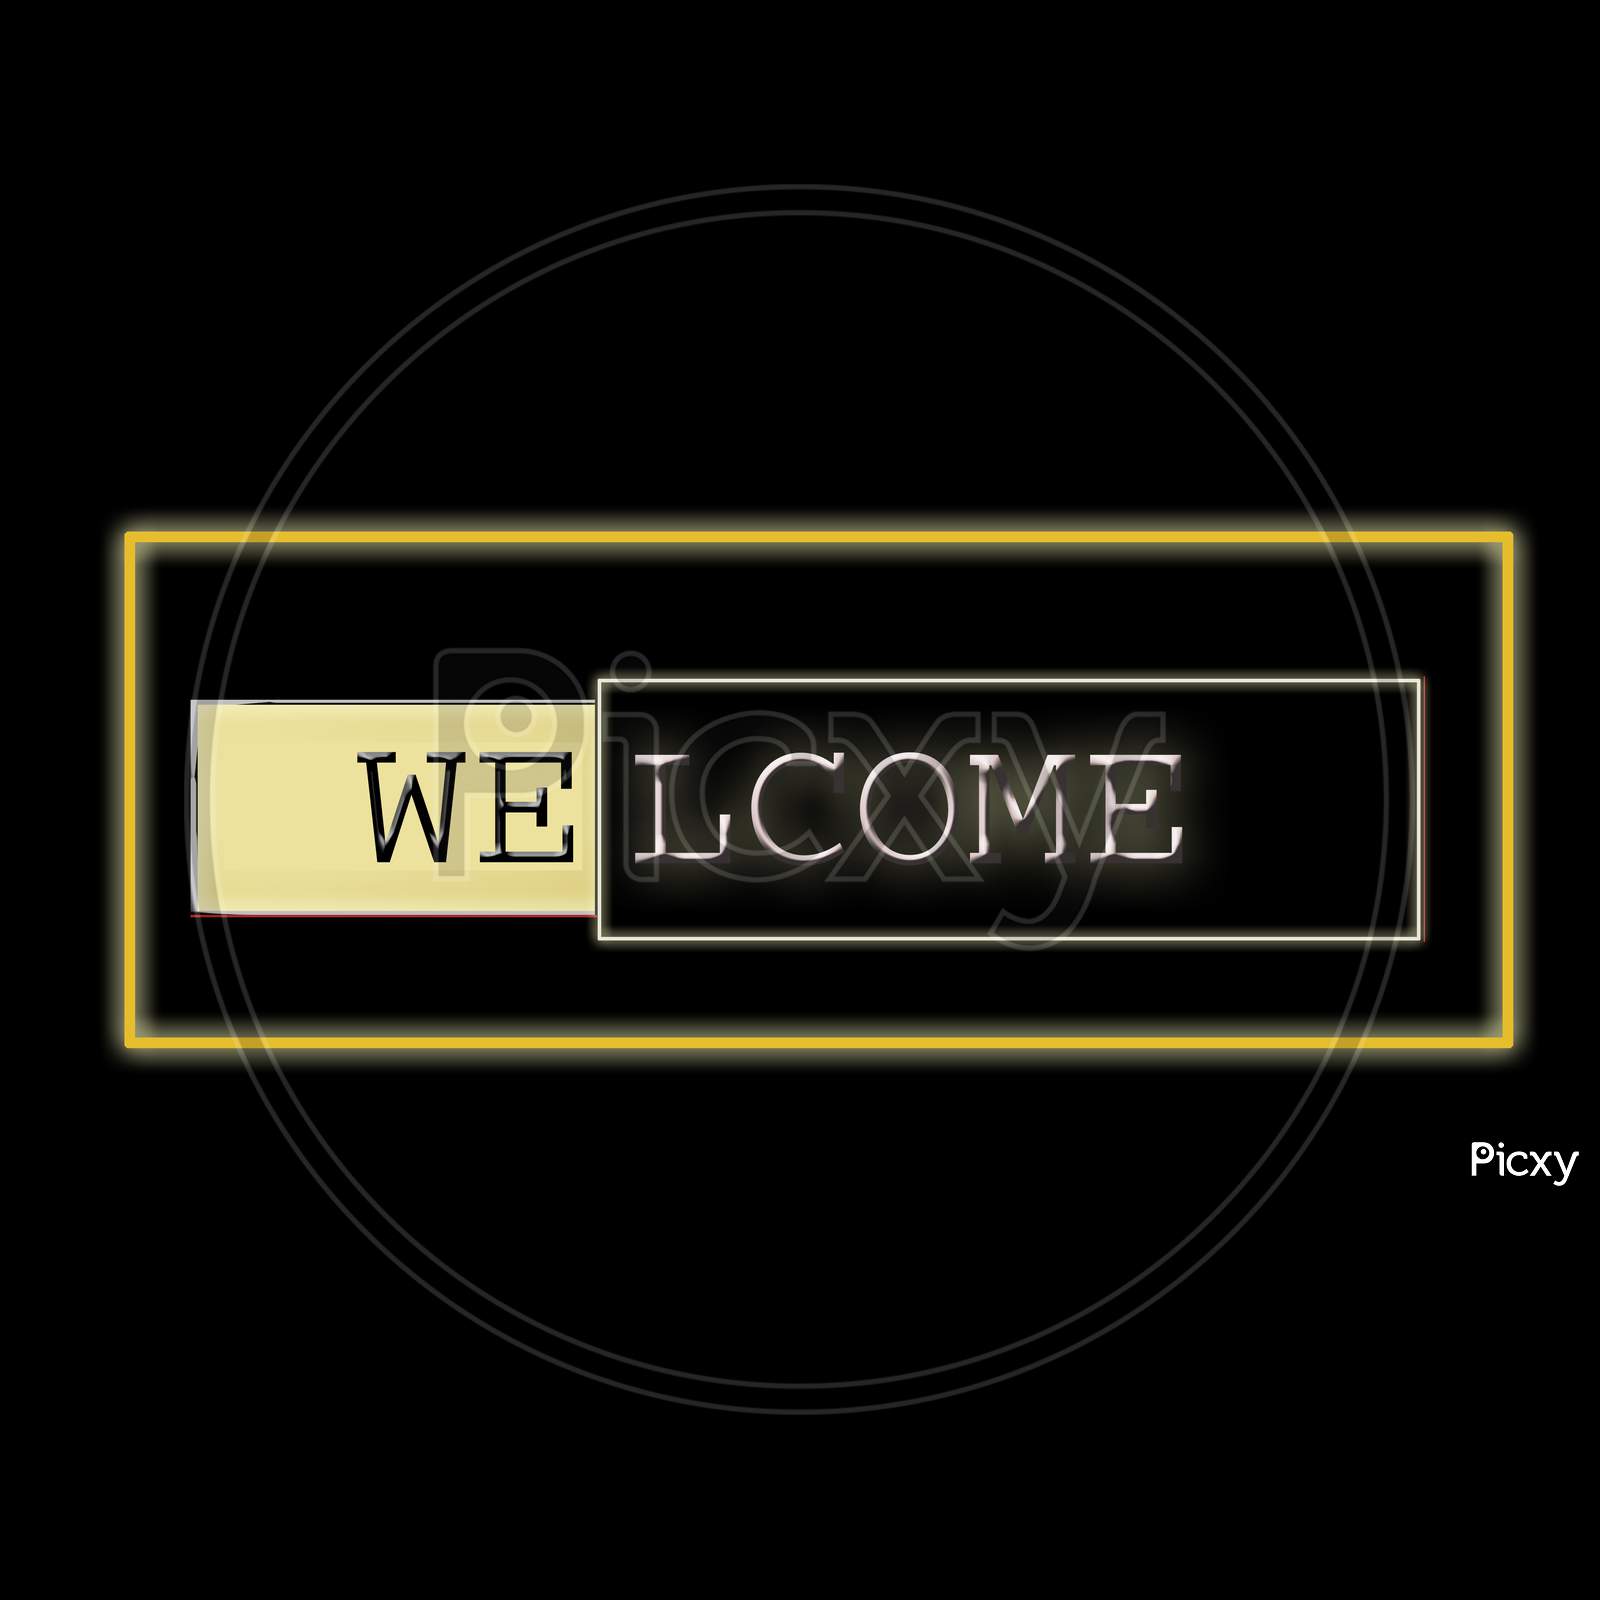 Welcome text with some designs,styles and color background